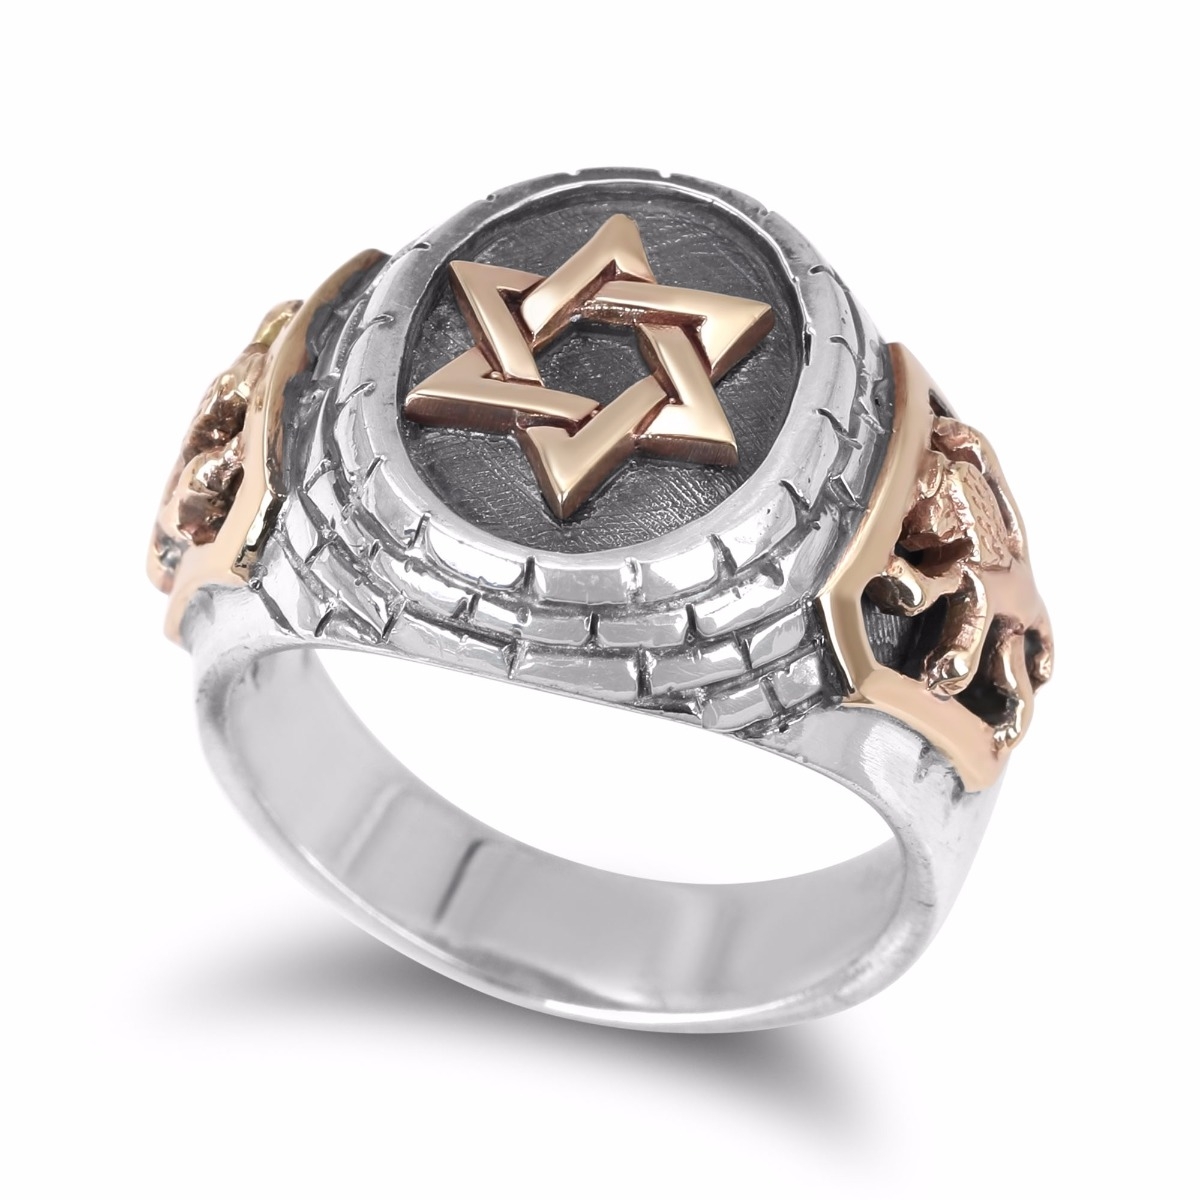 Rafael Jewelry Star of David and Lion of Judah 925 Sterling Silver and 9K Gold Ring - 1